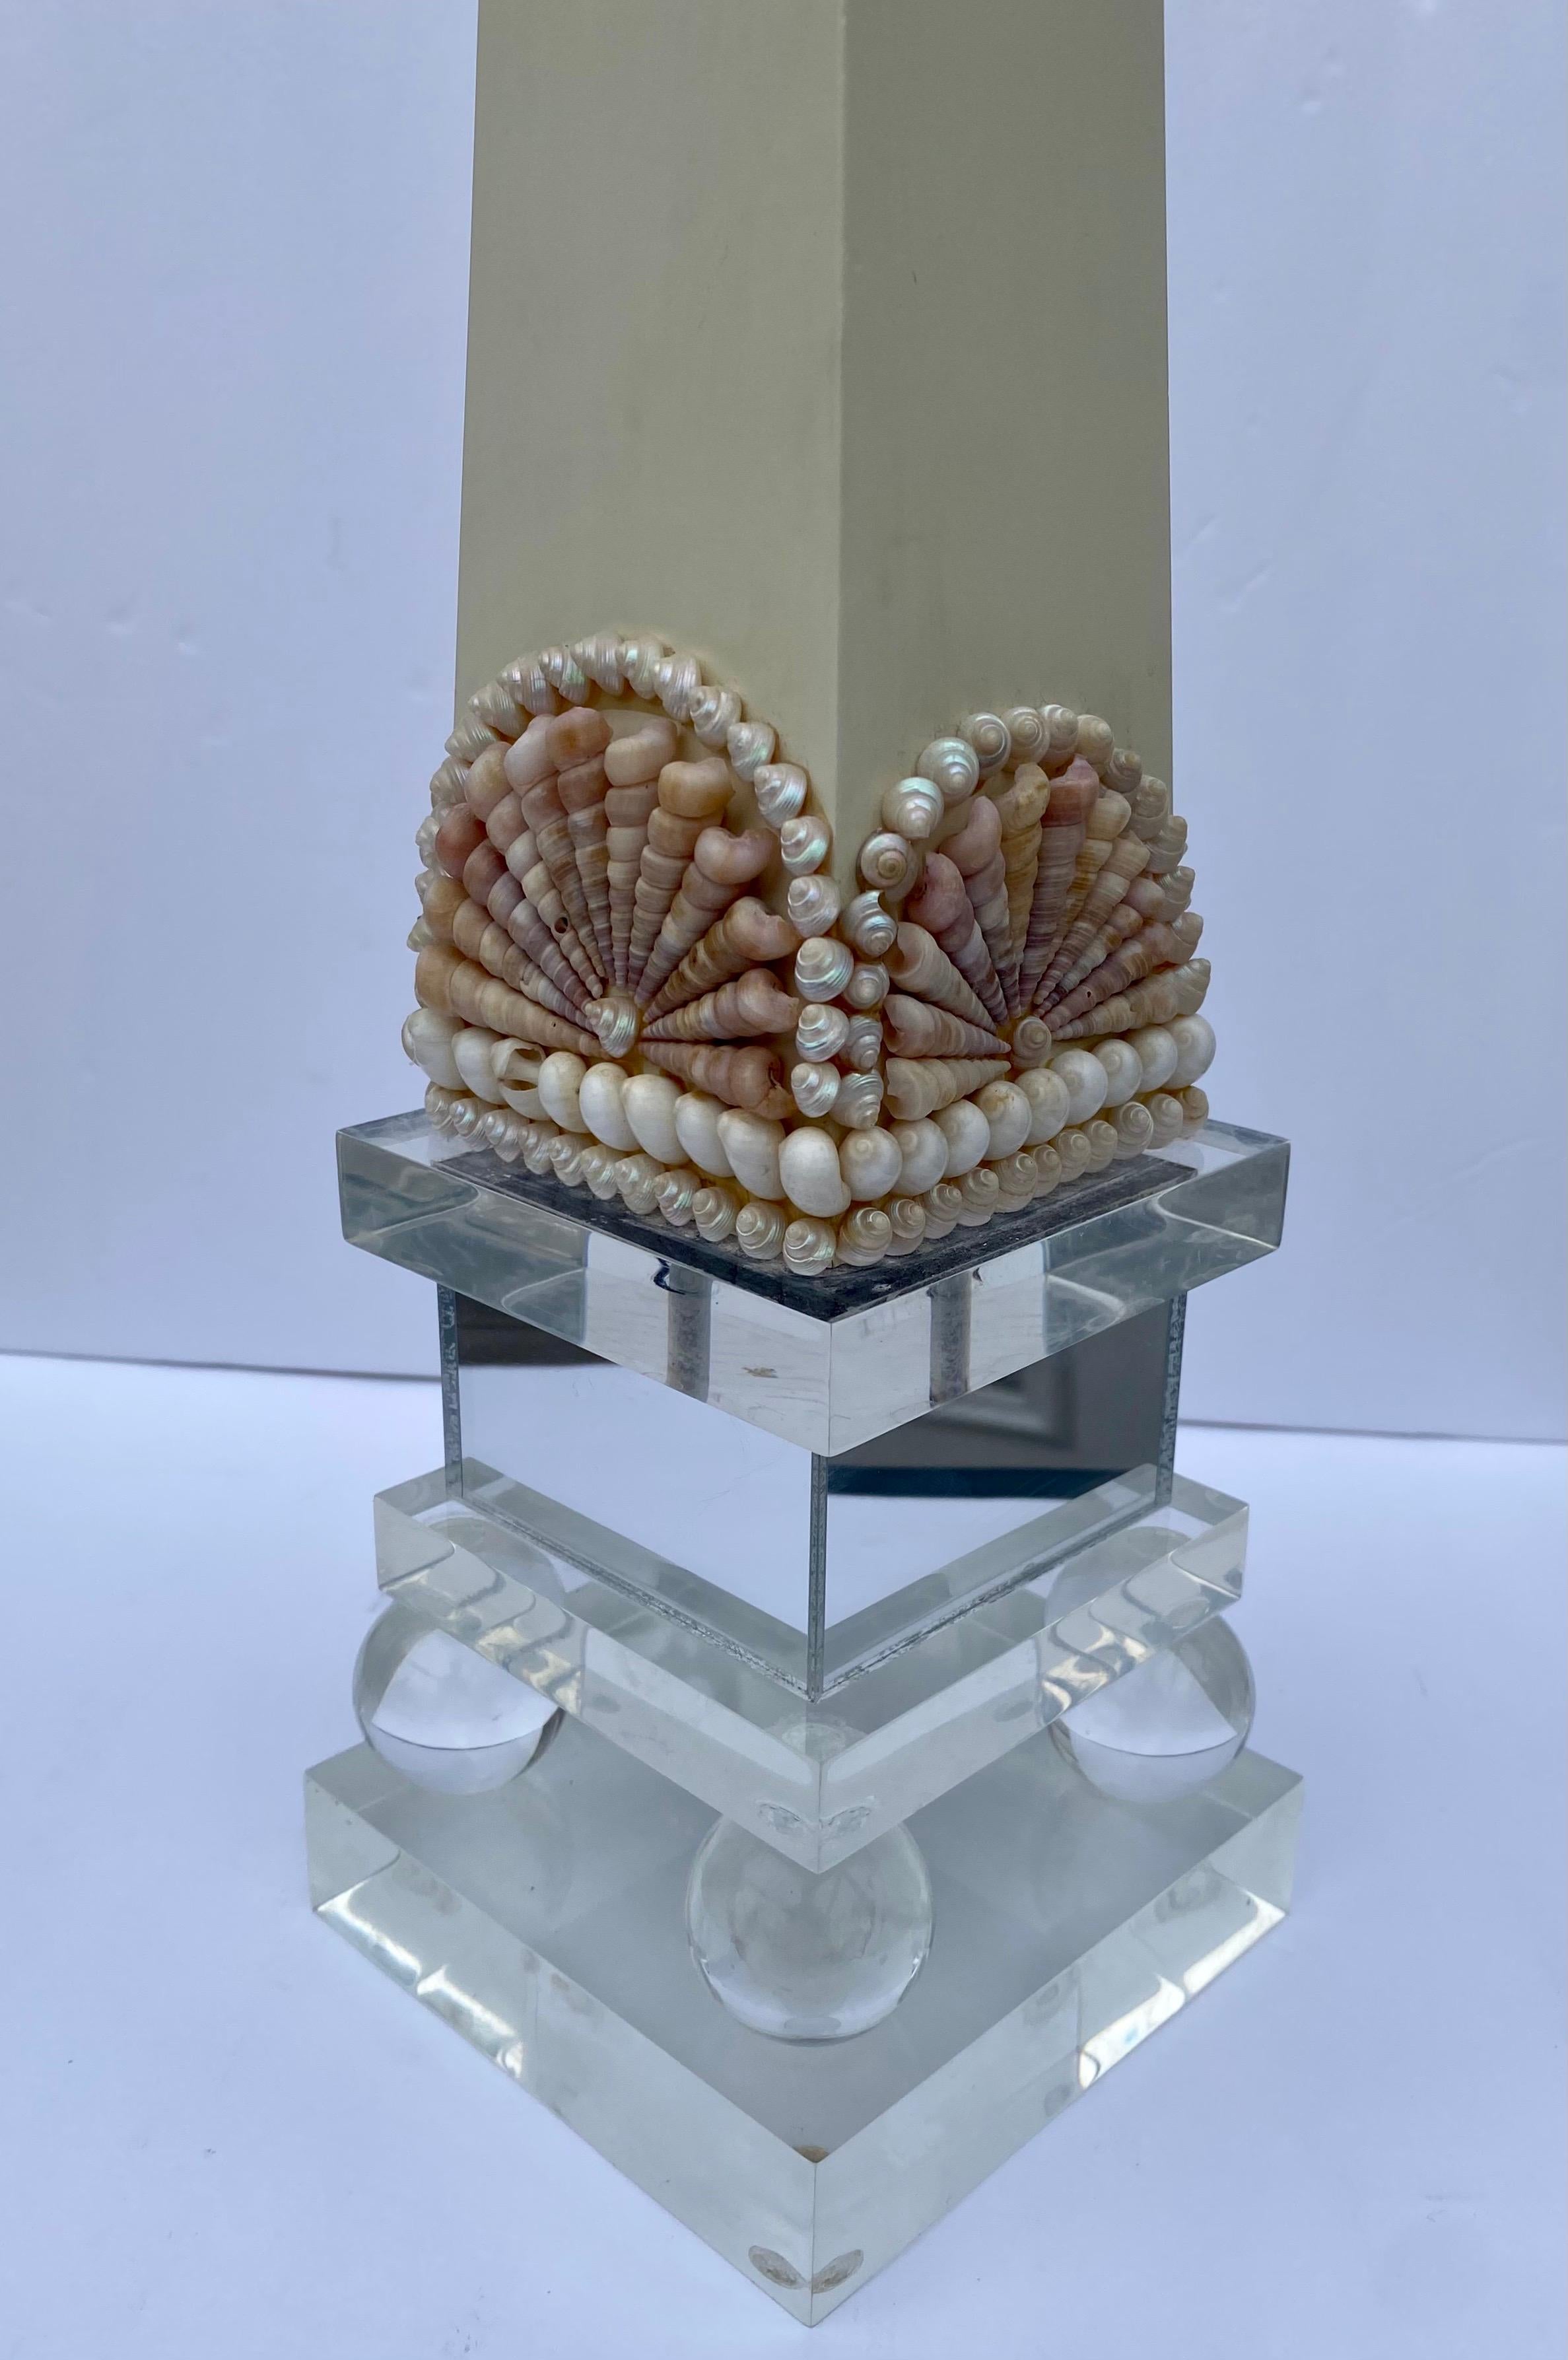 Post Modern 1980s Lucite Shell Seashell Mirror Lacquer Obelisk Table Sculpture In Good Condition For Sale In Lambertville, NJ